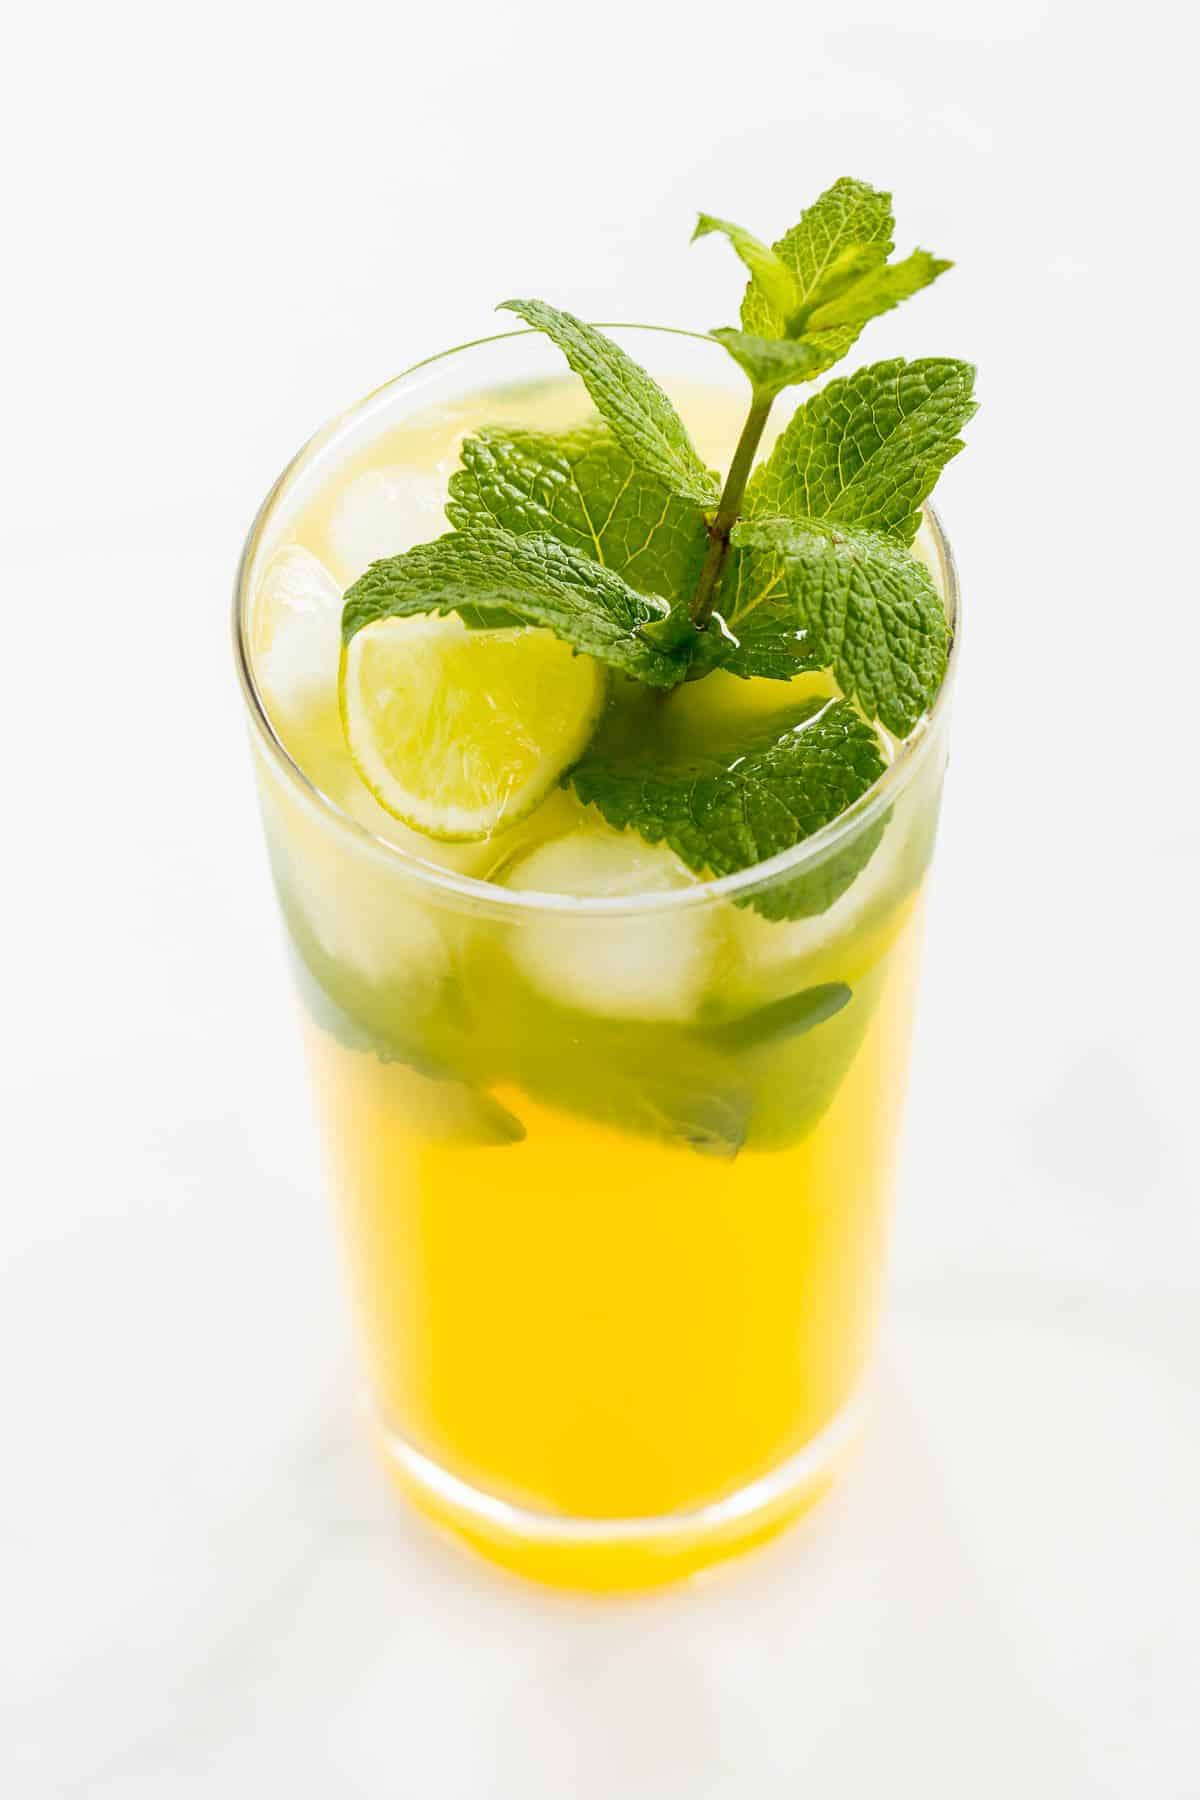 A mango mojito in a clear glass, garnished with a sprig of mint.